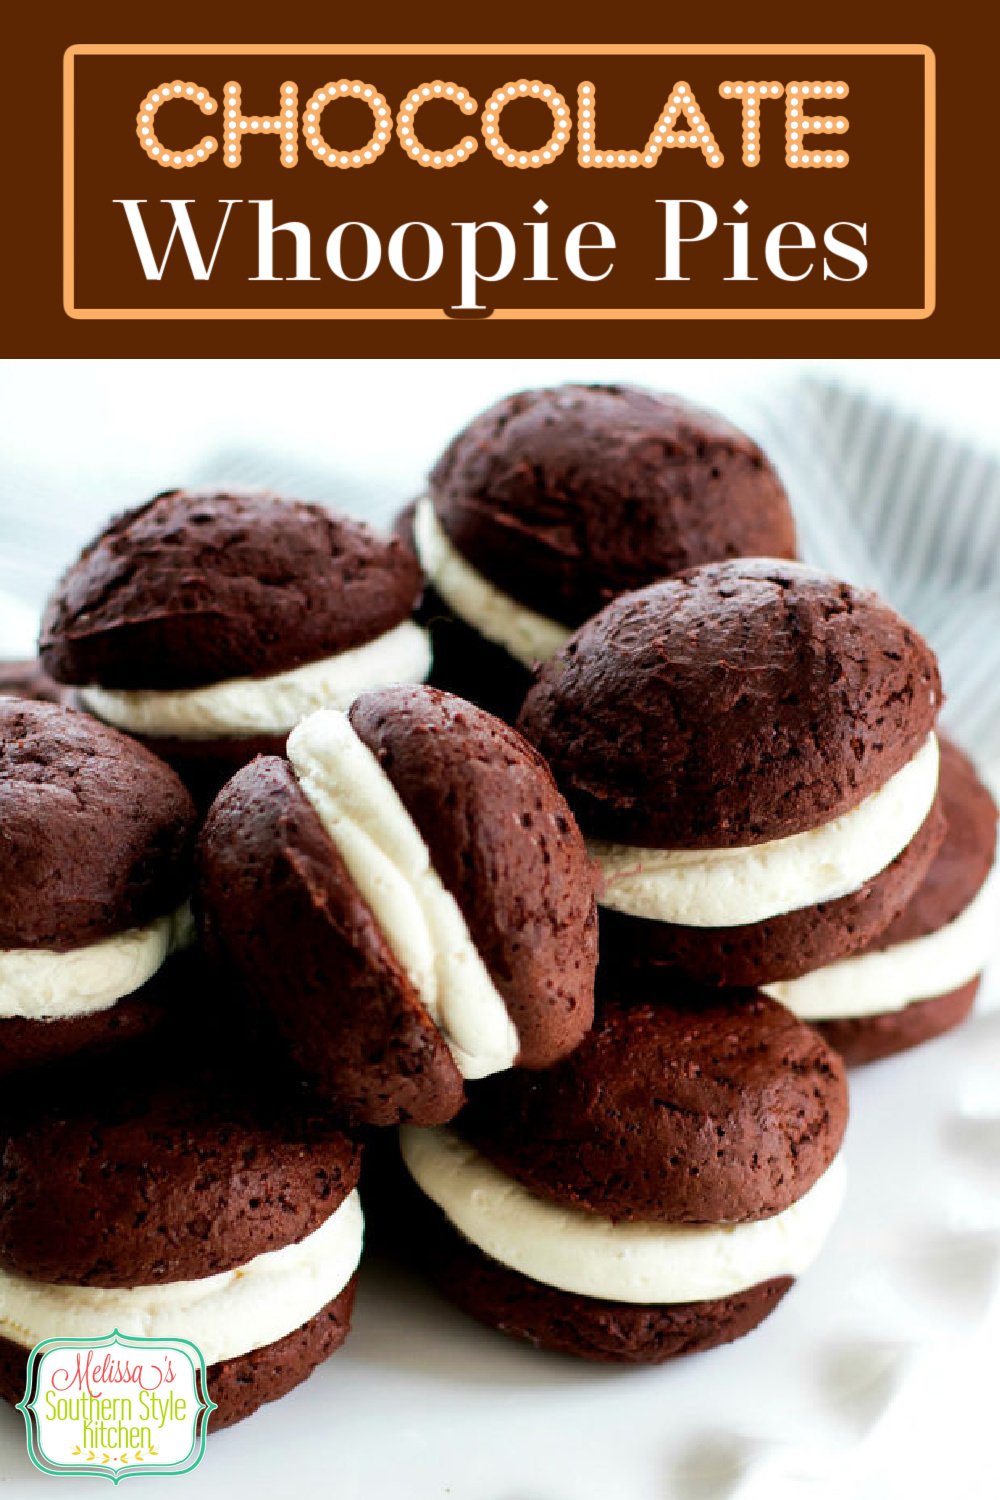 Soft pillowy Chocolate Whoopie Pies are sandwiched together with marshmallow cream making them the ultimate handheld treat #whoopiepies #chocolate #chocolatewhoopiepies #chocolatepie #holidaybaking #holidaydesserts #marshmallows #cookies #southernfood #southernrecipes #desserts #dessertfoodrecipes